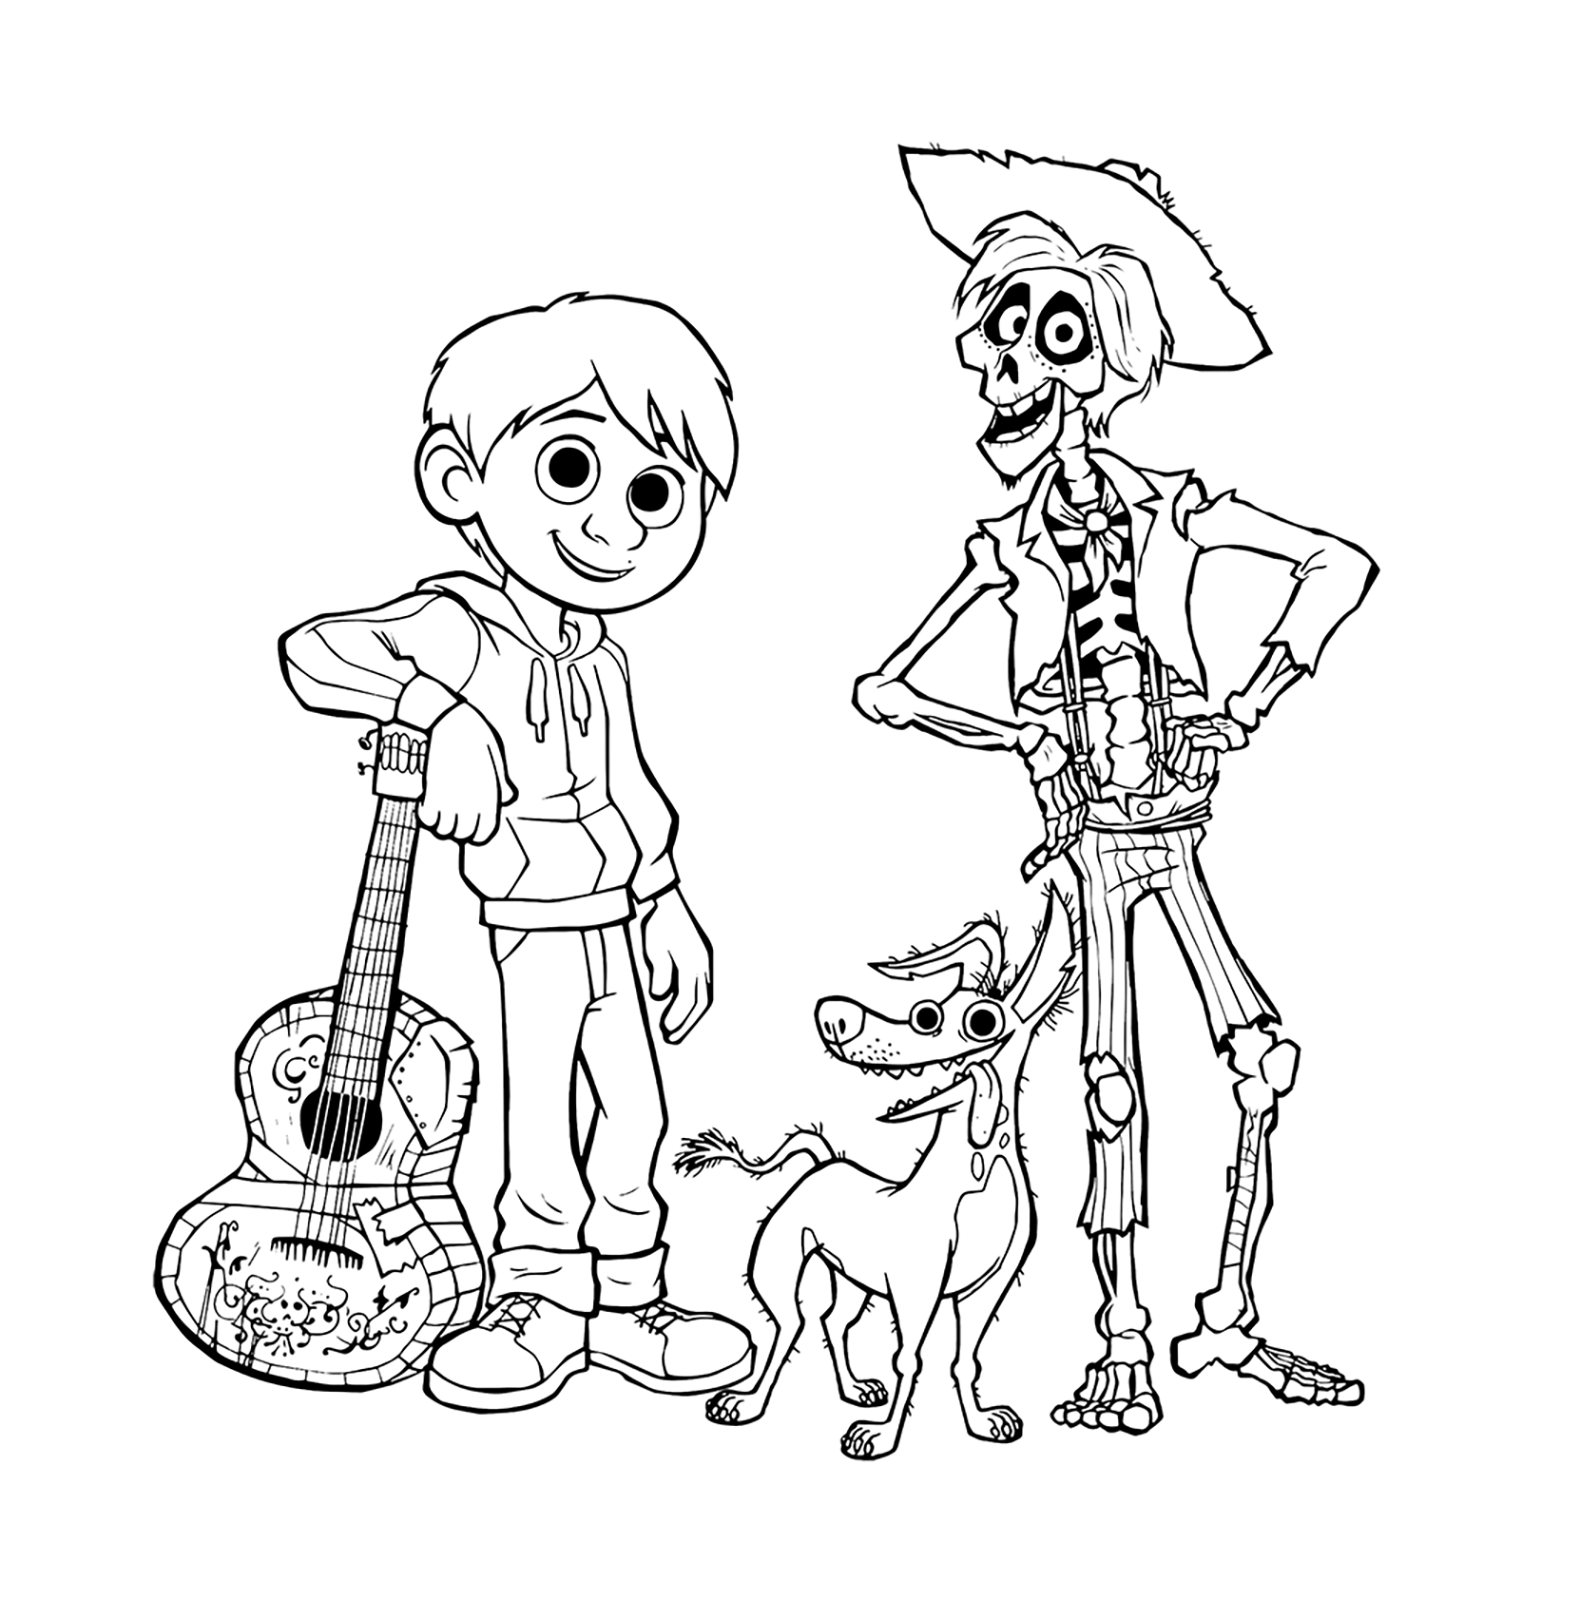 "Coco" coloring pages